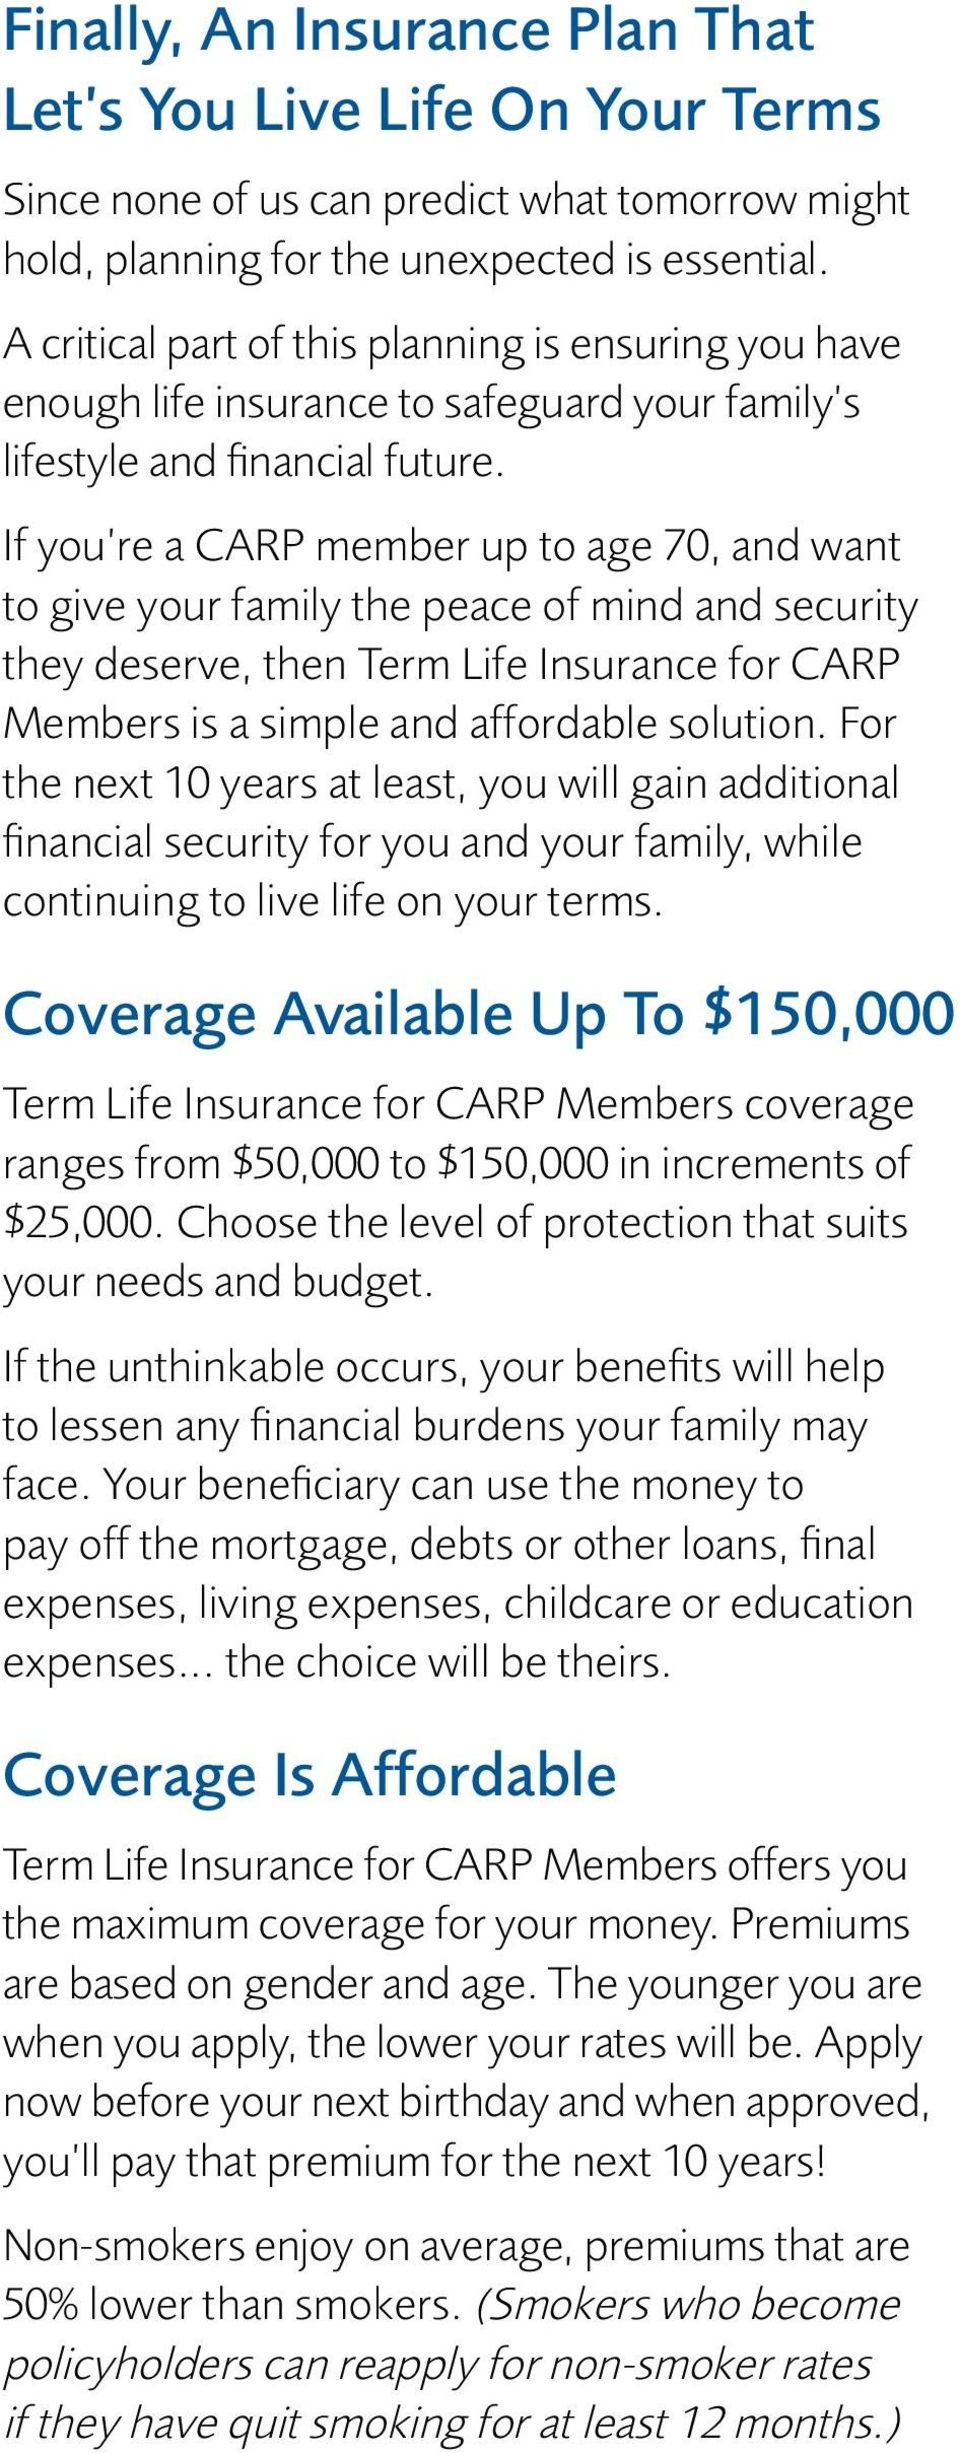 If you re a CARP member up to age 70, and want to give your family the peace of mind and security they deserve, then Term Life Insurance for CARP Members is a simple and affordable solution.